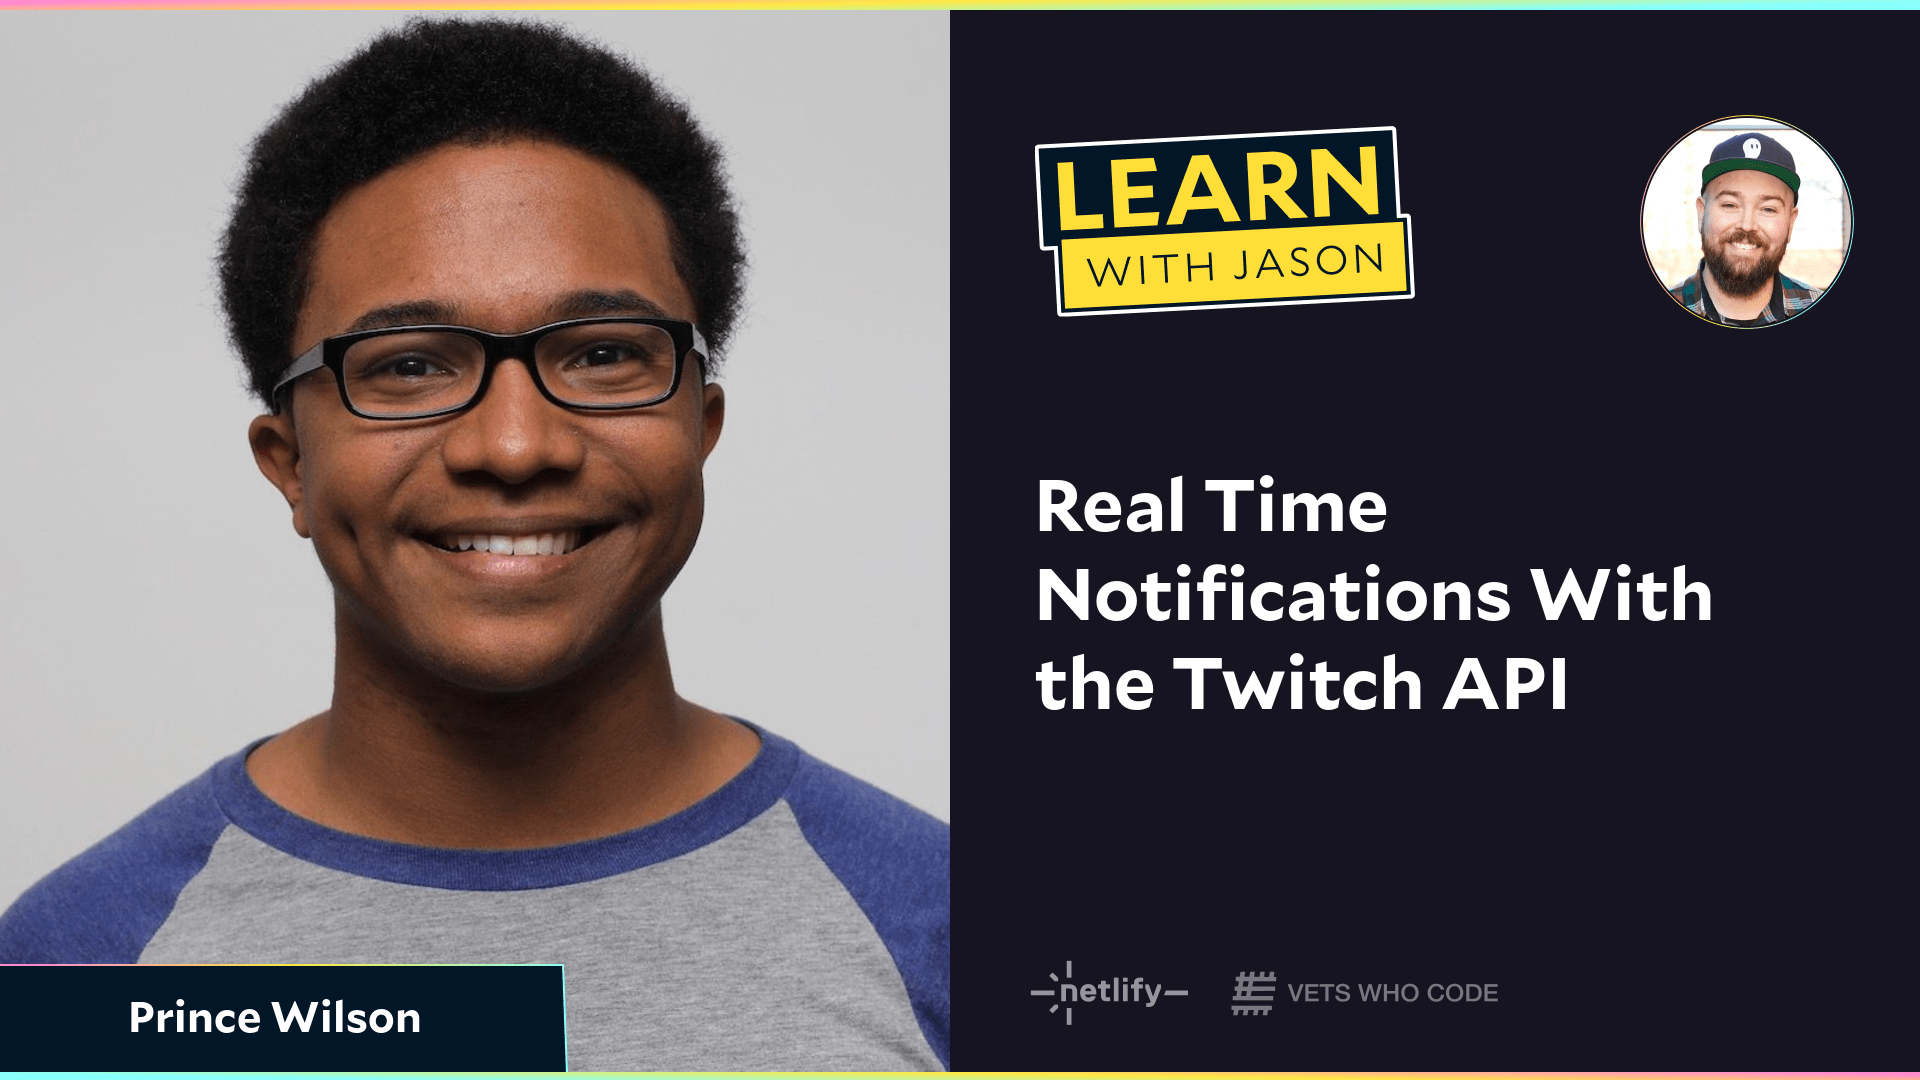 Real Time Notifications With the Twitch API (with Prince Wilson)